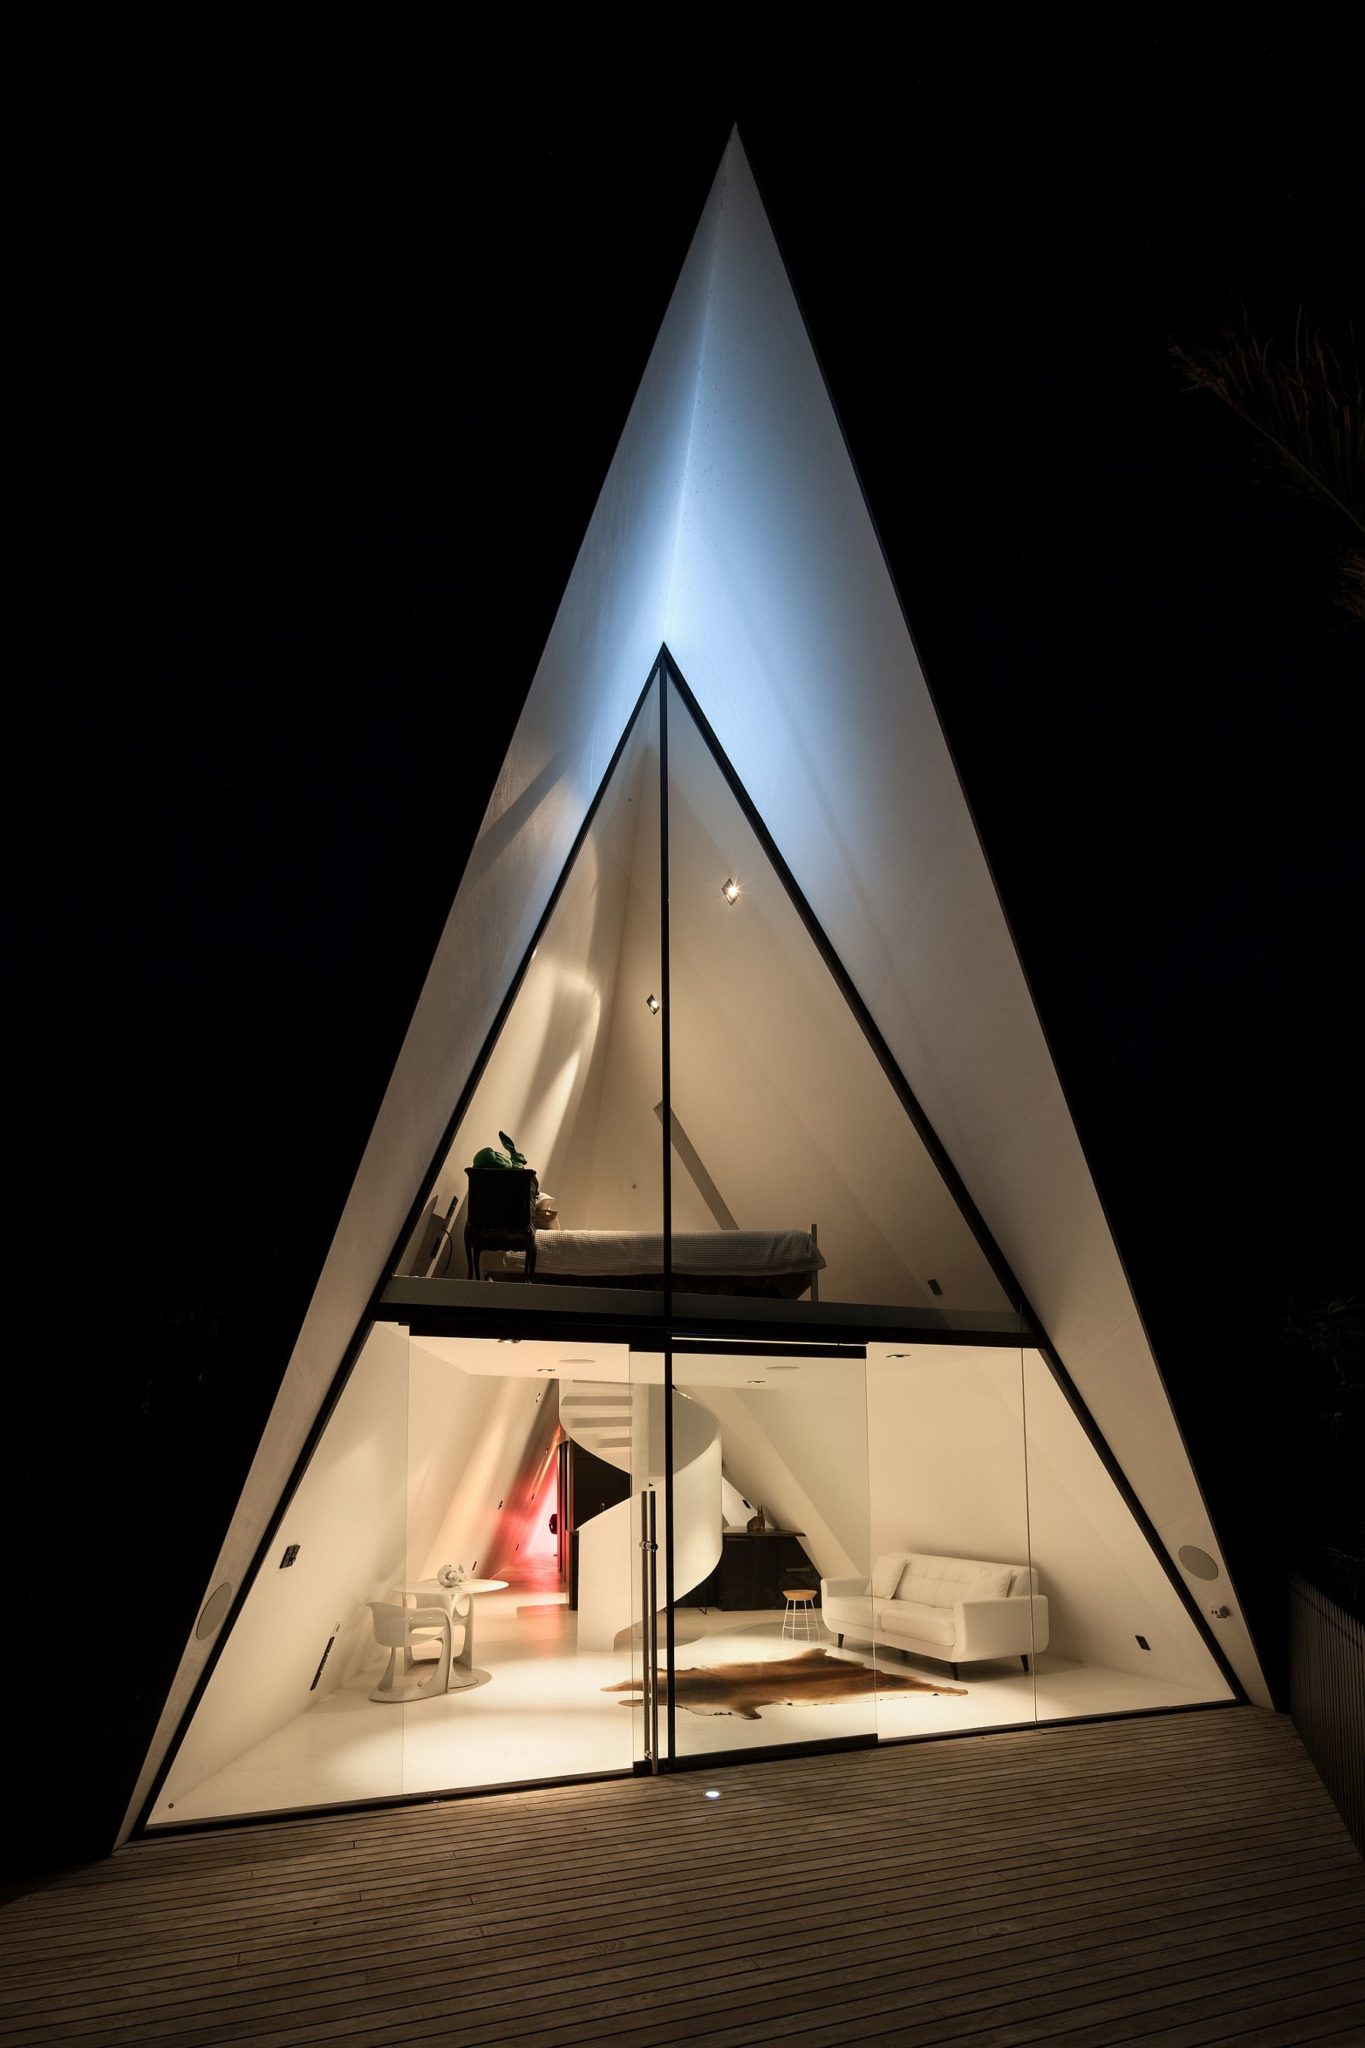 Dark exterior of the tent house allows it to blend into the backdrop